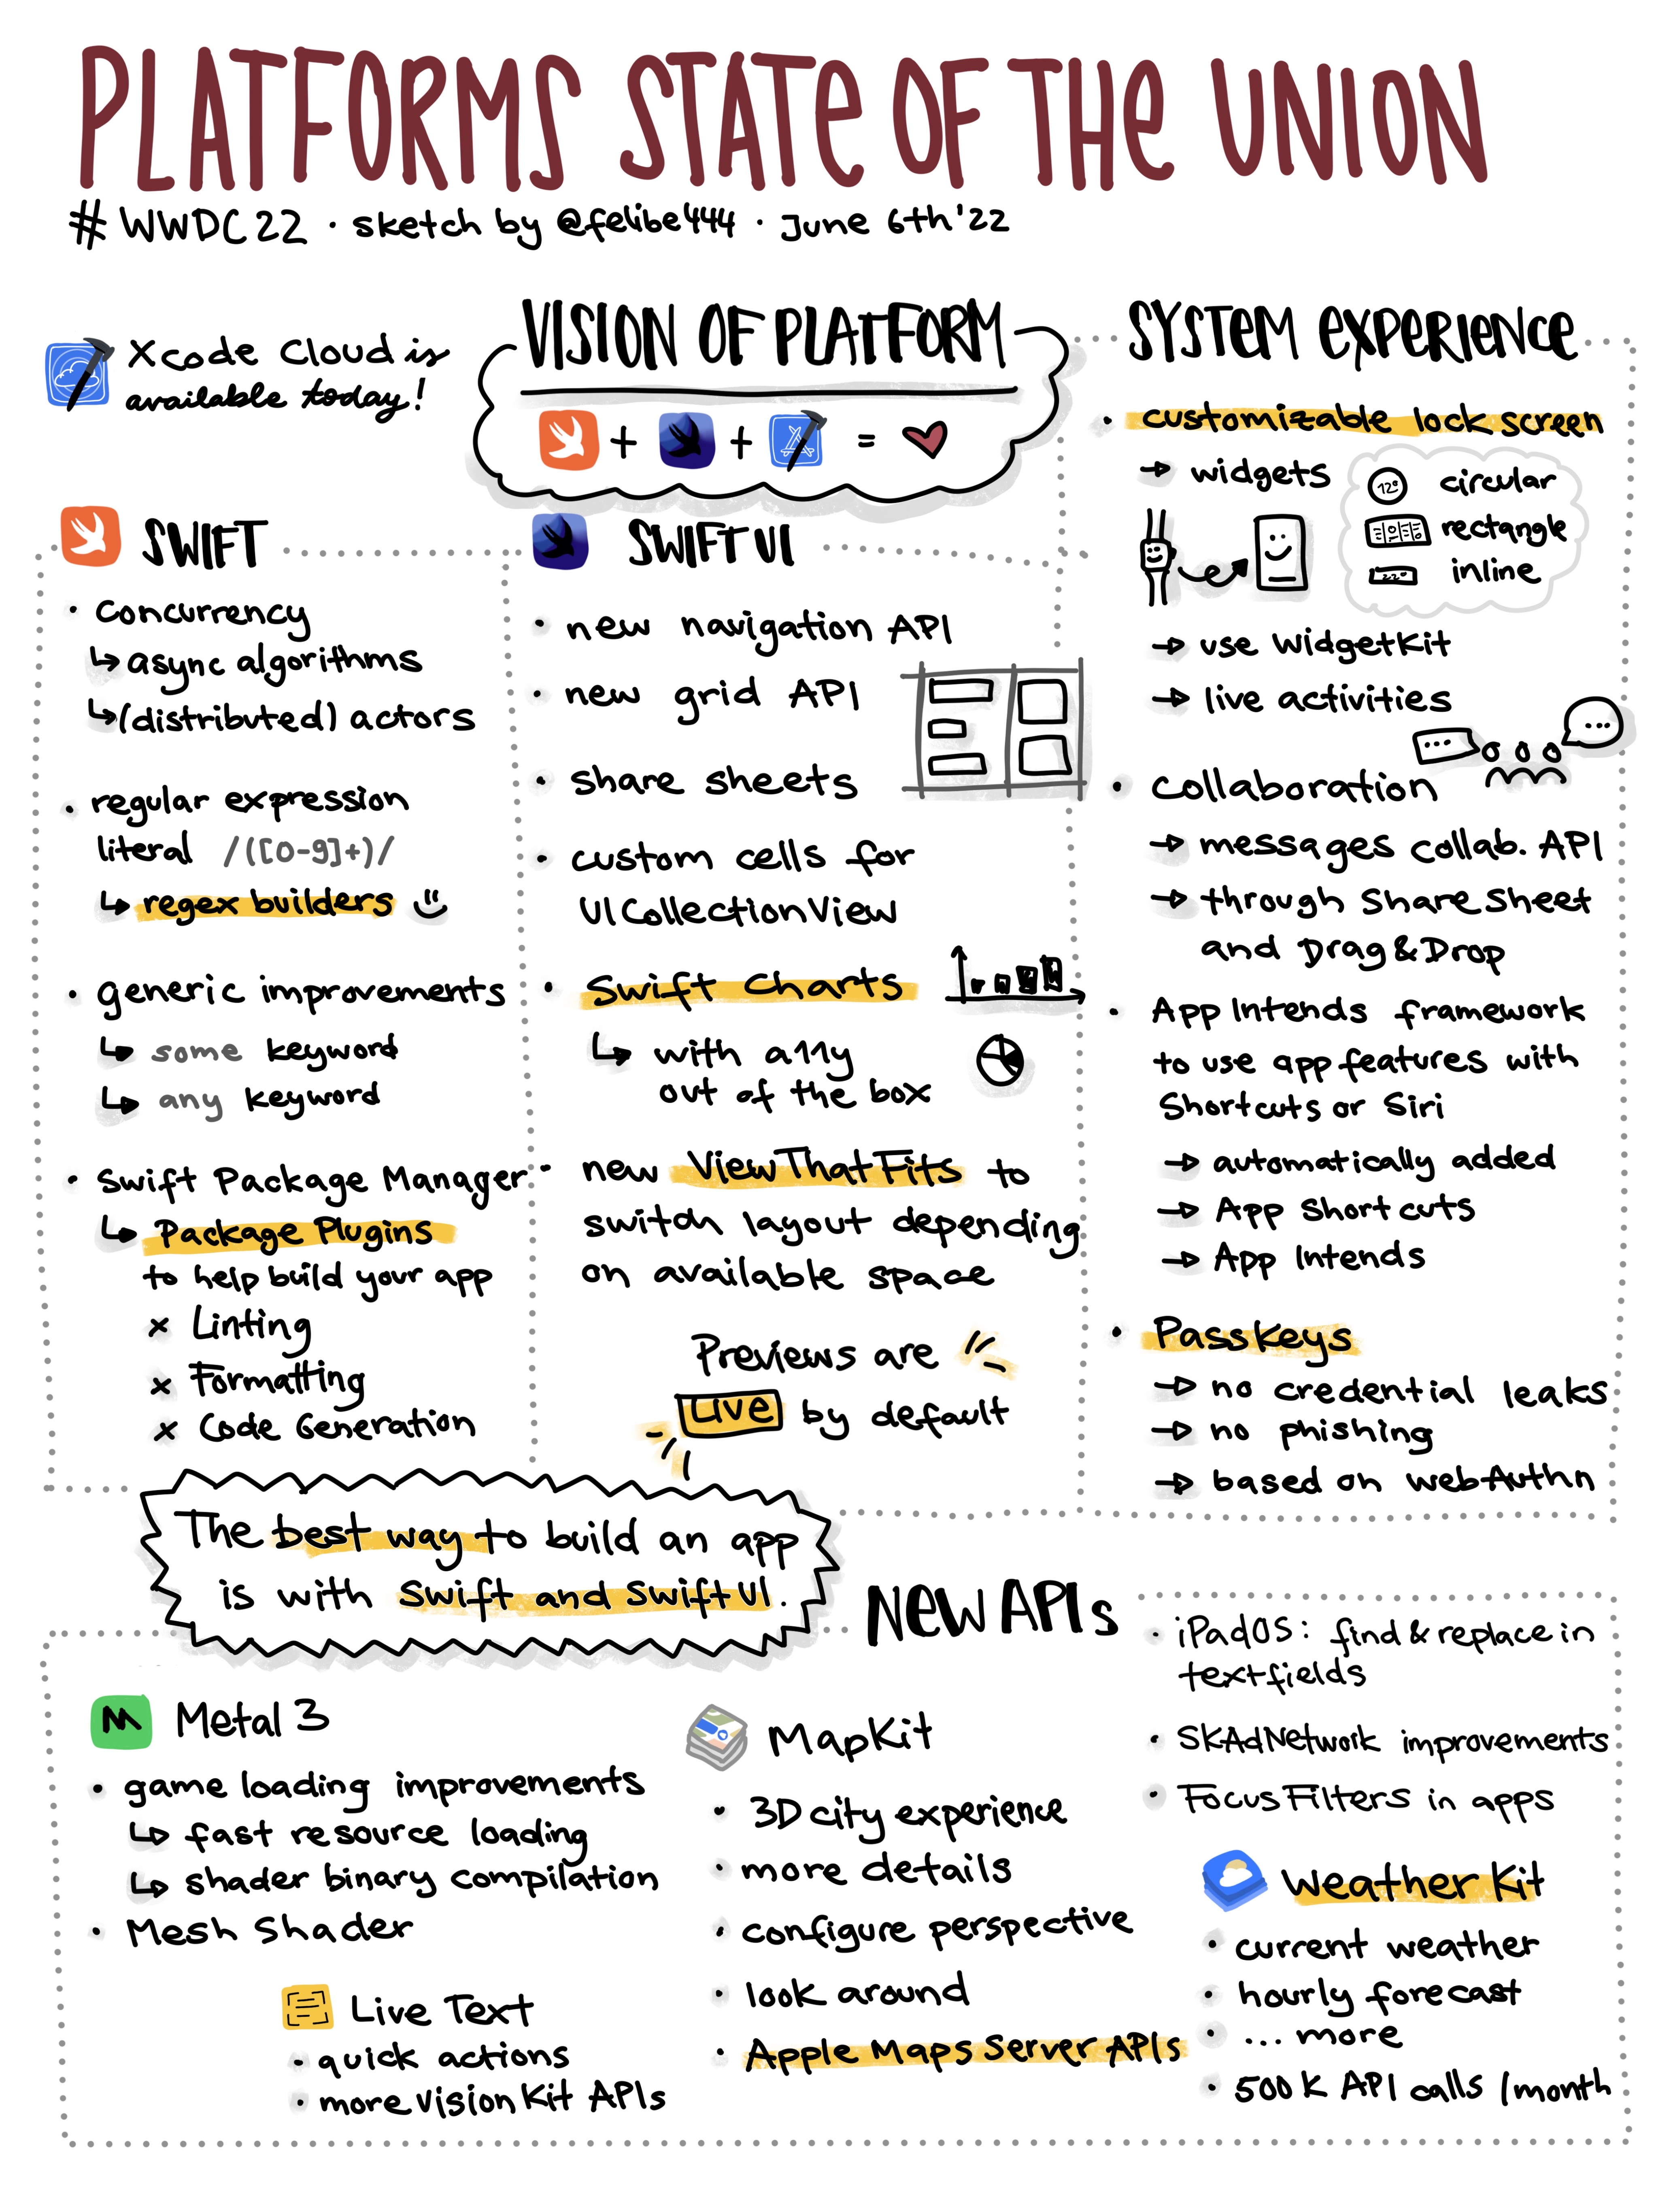 Sketchnote about WWDC22 Platforms State of the Union talk with news about Swift, SwiftUI, System Experiences and new APIs